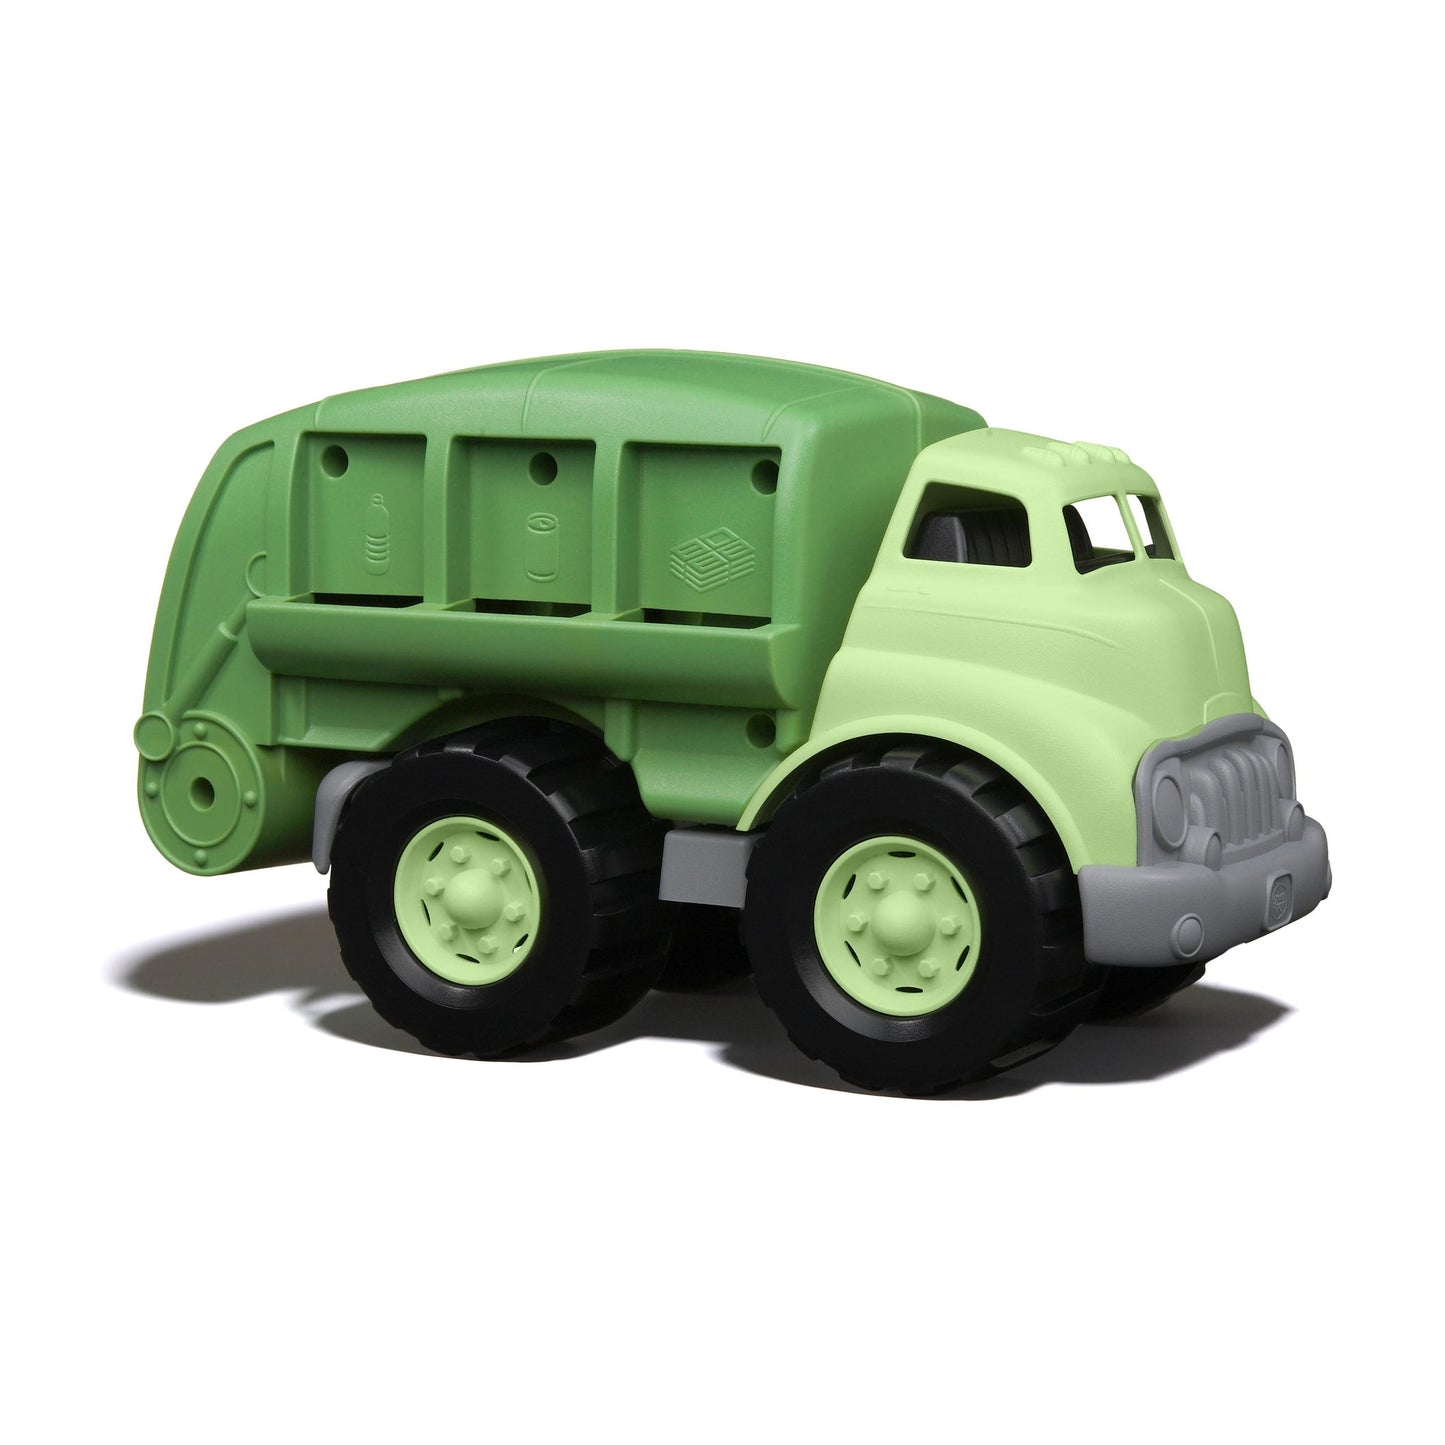 the recycling truck on a white background